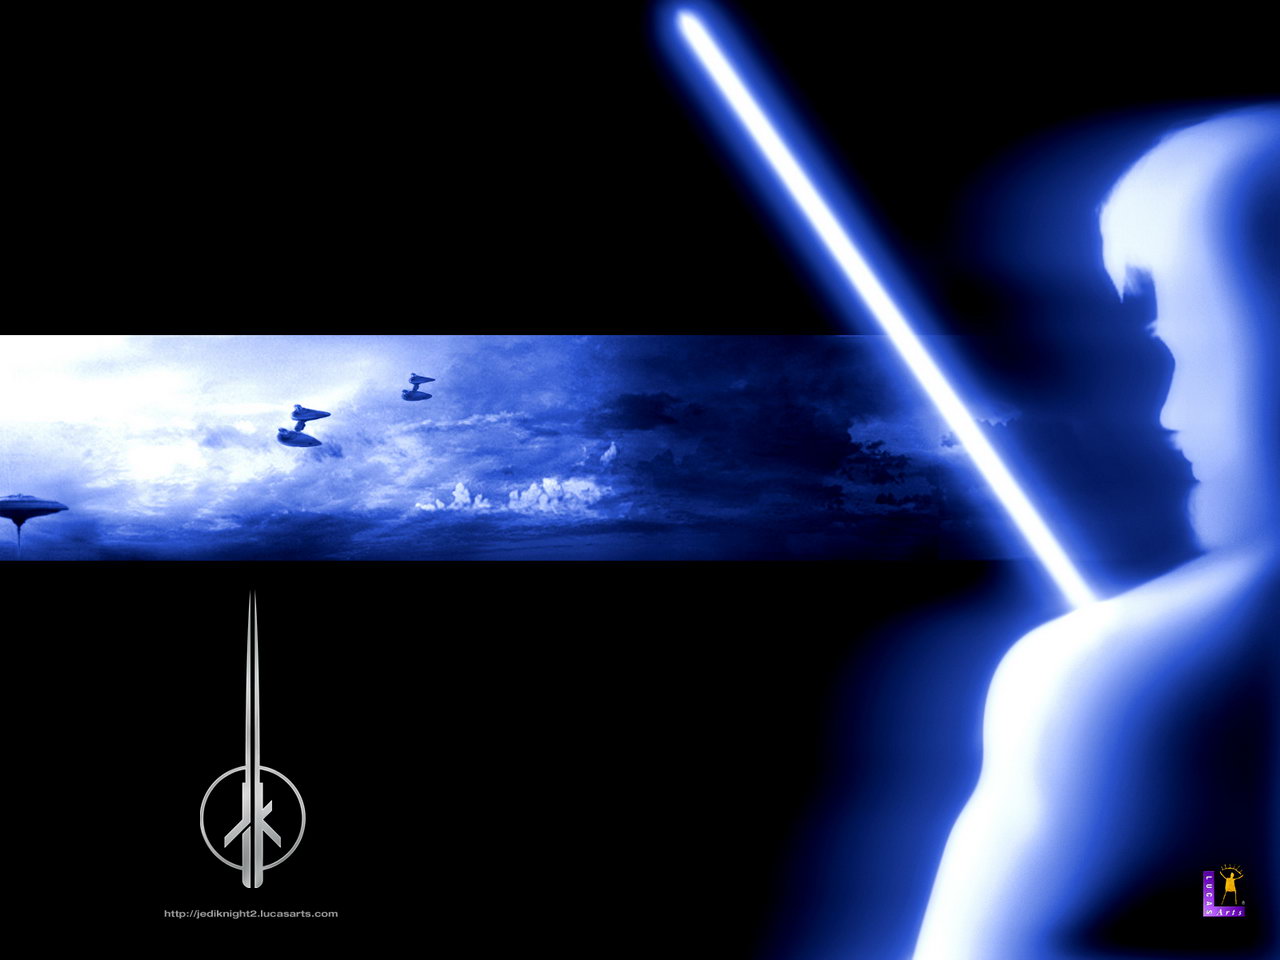  Jedi Knight 2 Jedi Outcast Wallpaper Gallery   Best Game Wallpapers 1280x960